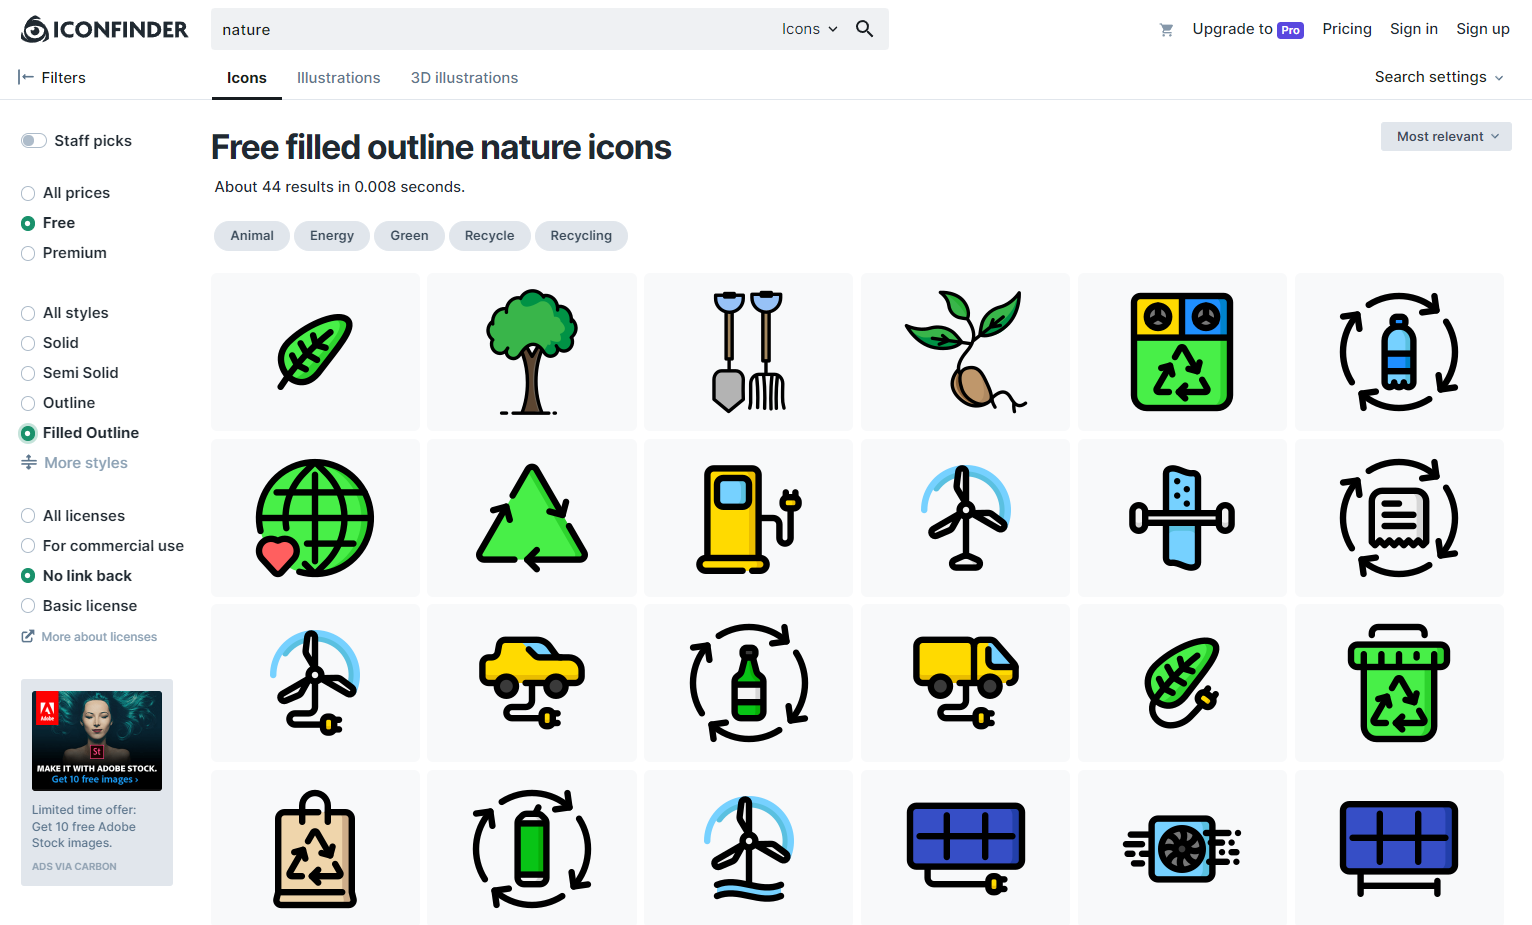 Iconfinder is the most spacious community of icons available on the Internet